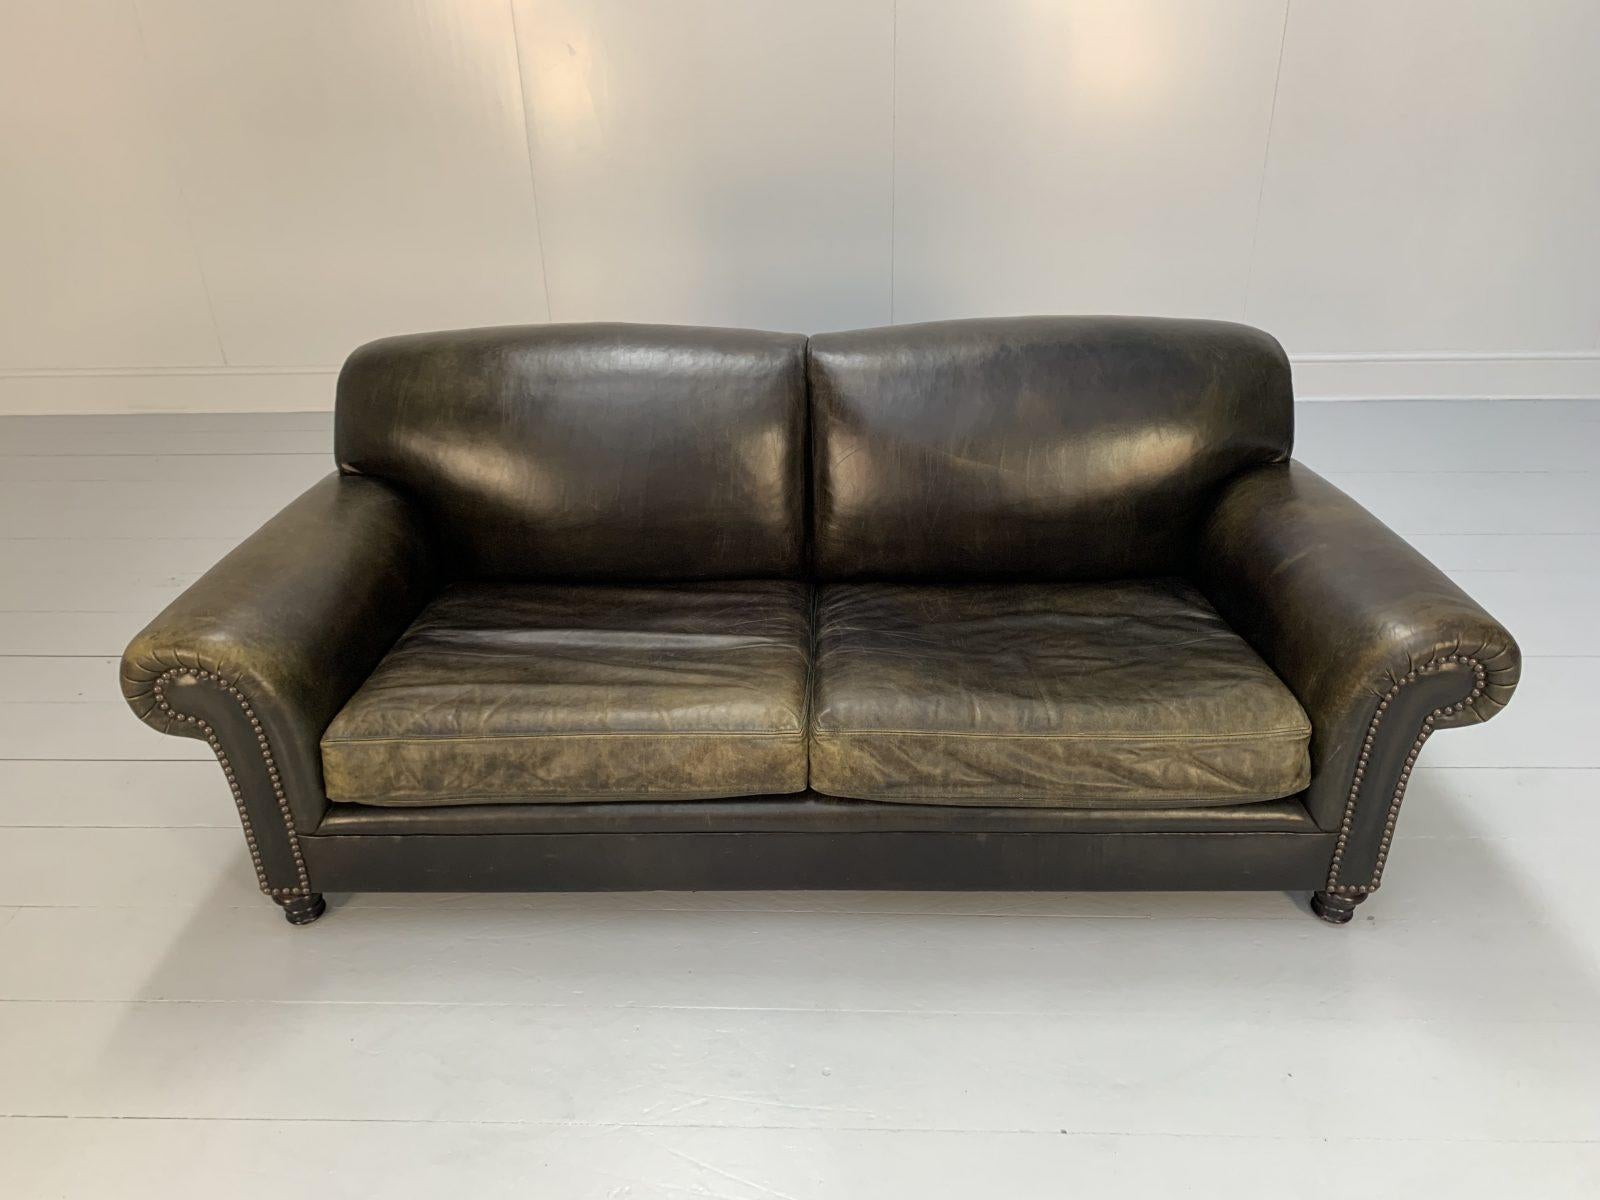 George Smith Signature “Elverdon-Arm” Large 2.5-Seat Sofa – In Green Leather In Good Condition For Sale In Barrowford, GB